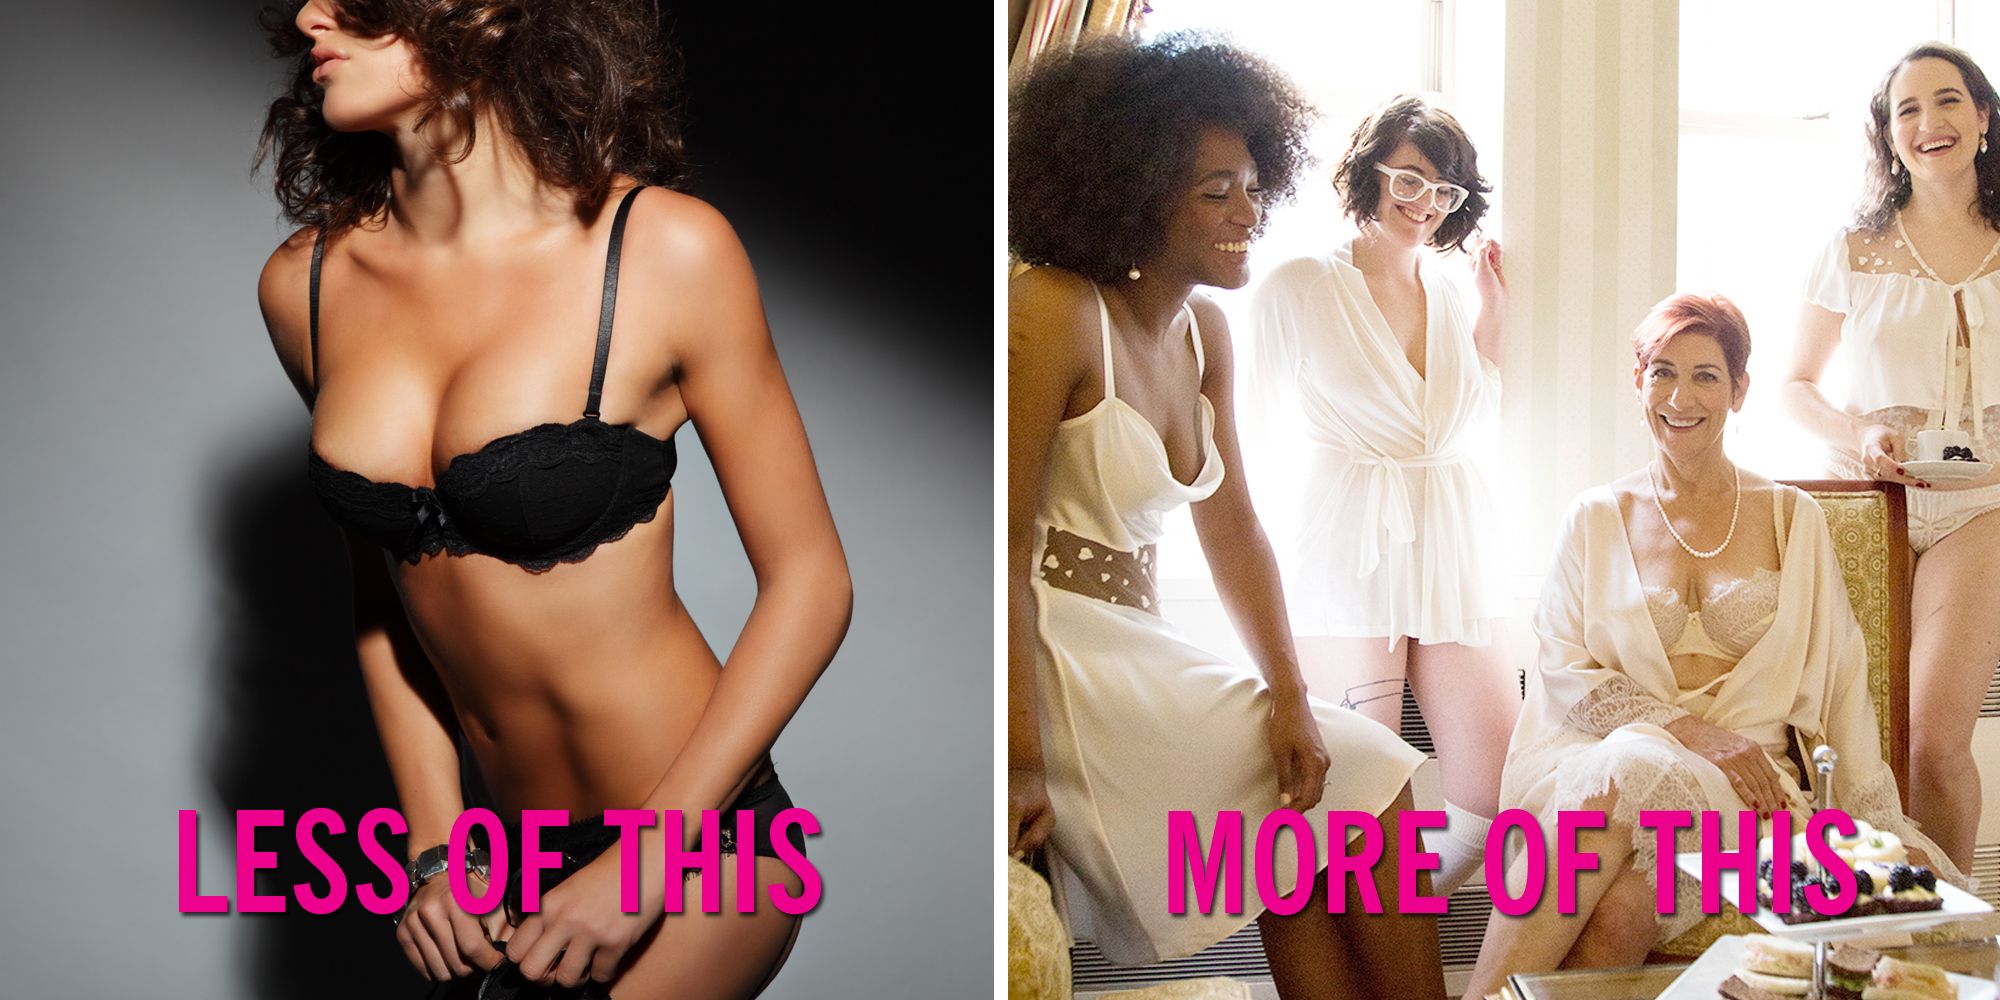 This New Lingerie Ad Features Real, Incredible Women